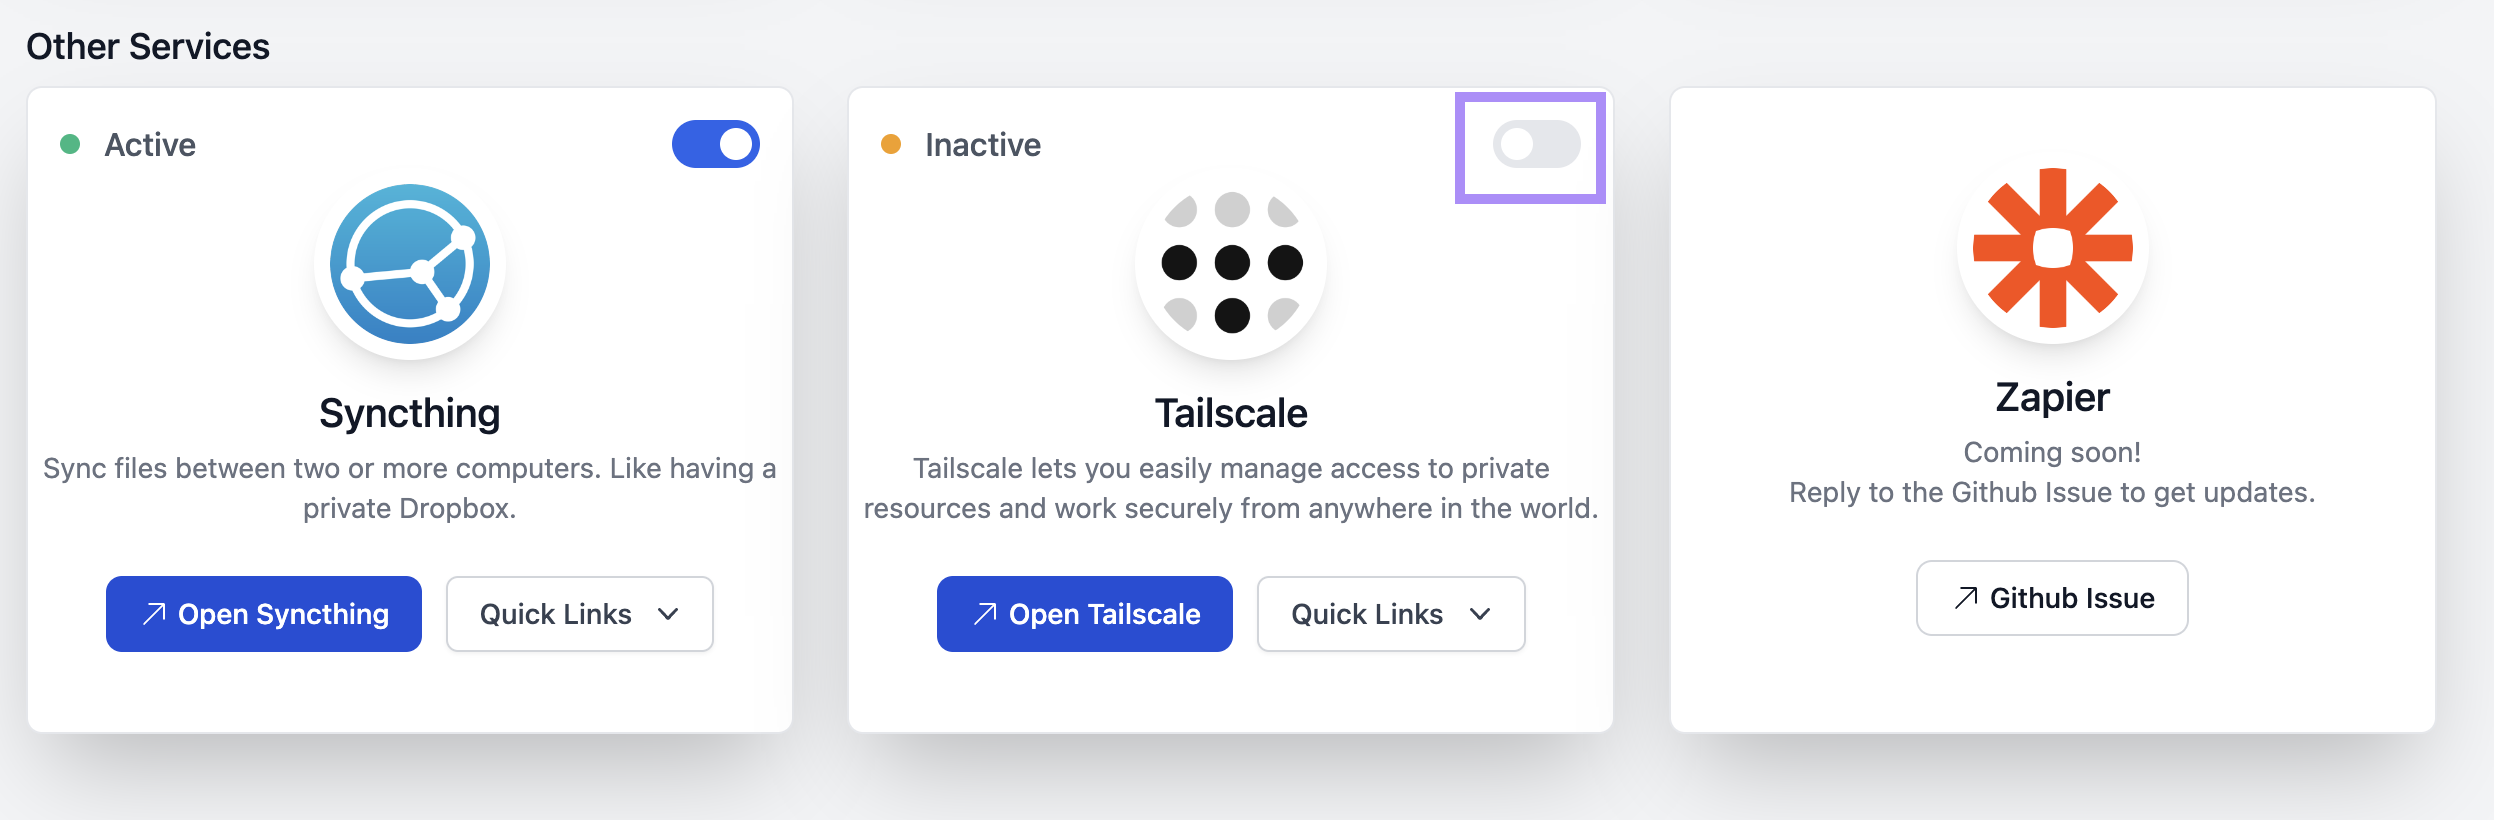 Scroll to the Other Services section and Enable Tailscale by clicking the switch-toggle.